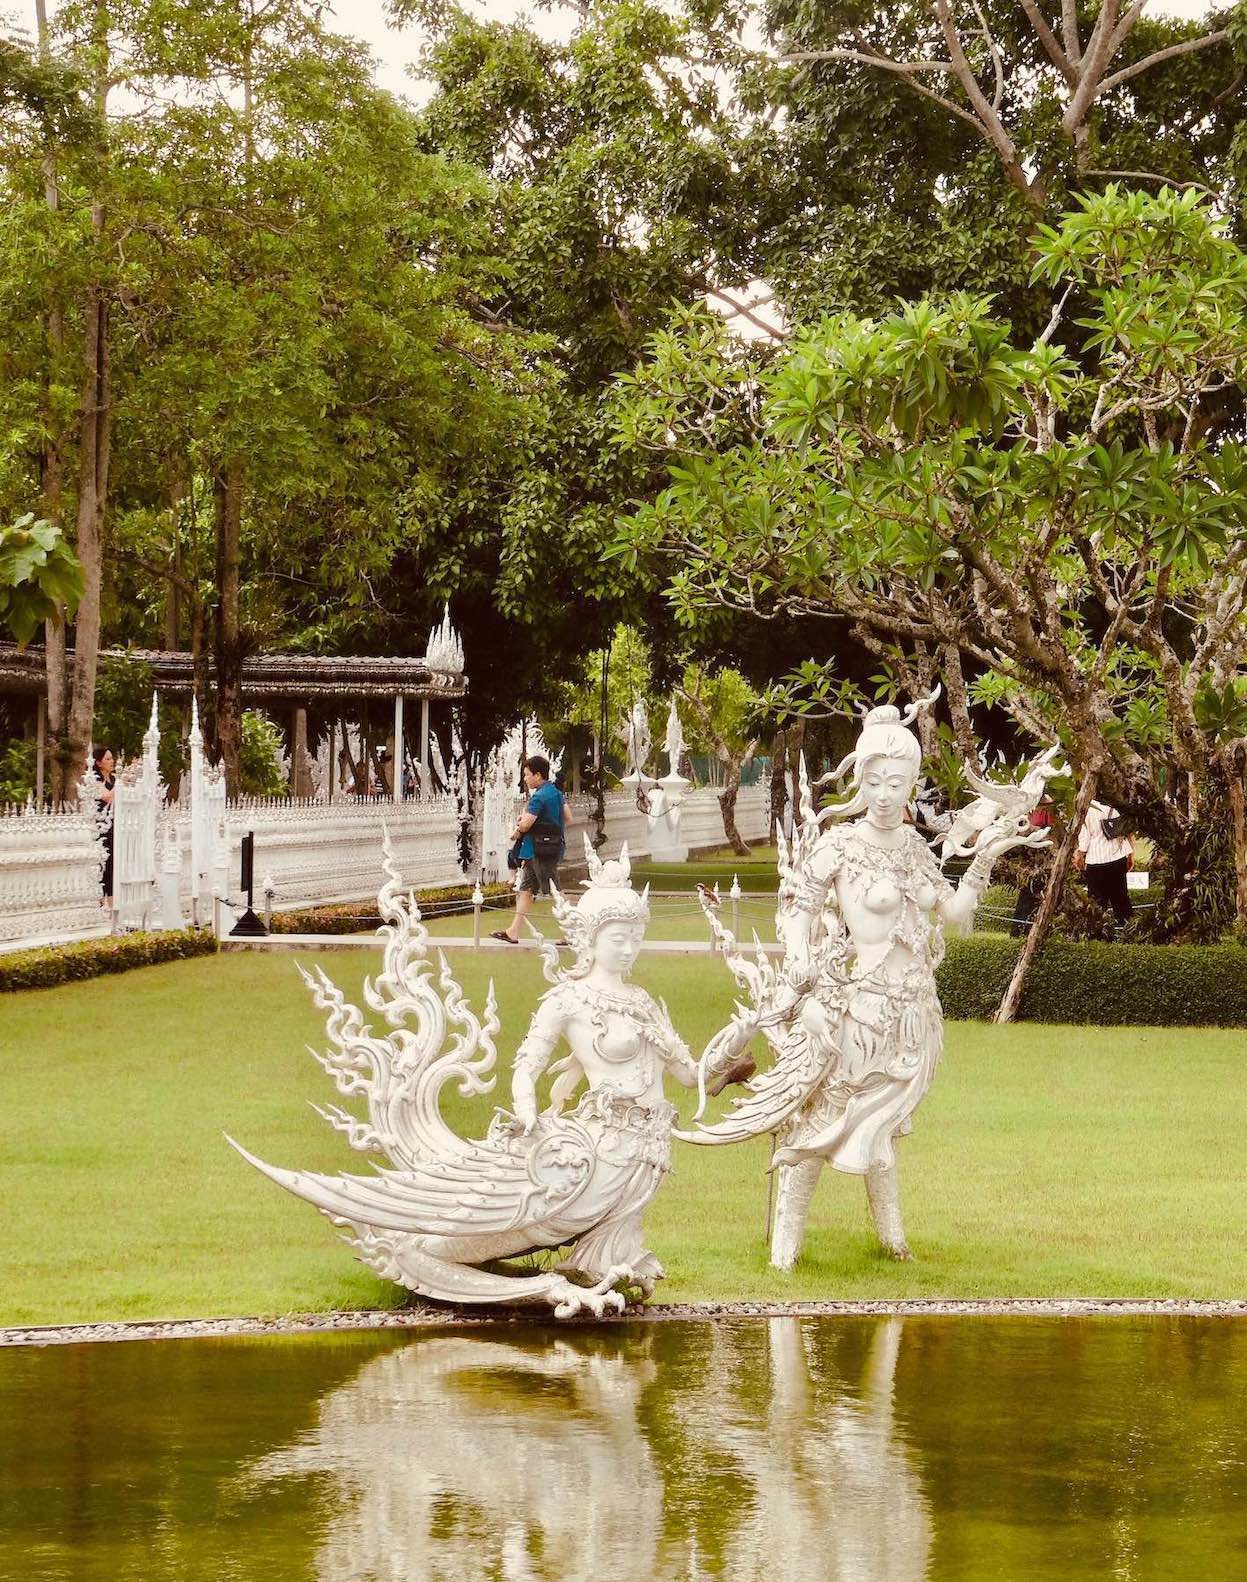 Sculptures at The White Temple in Chiang Rai